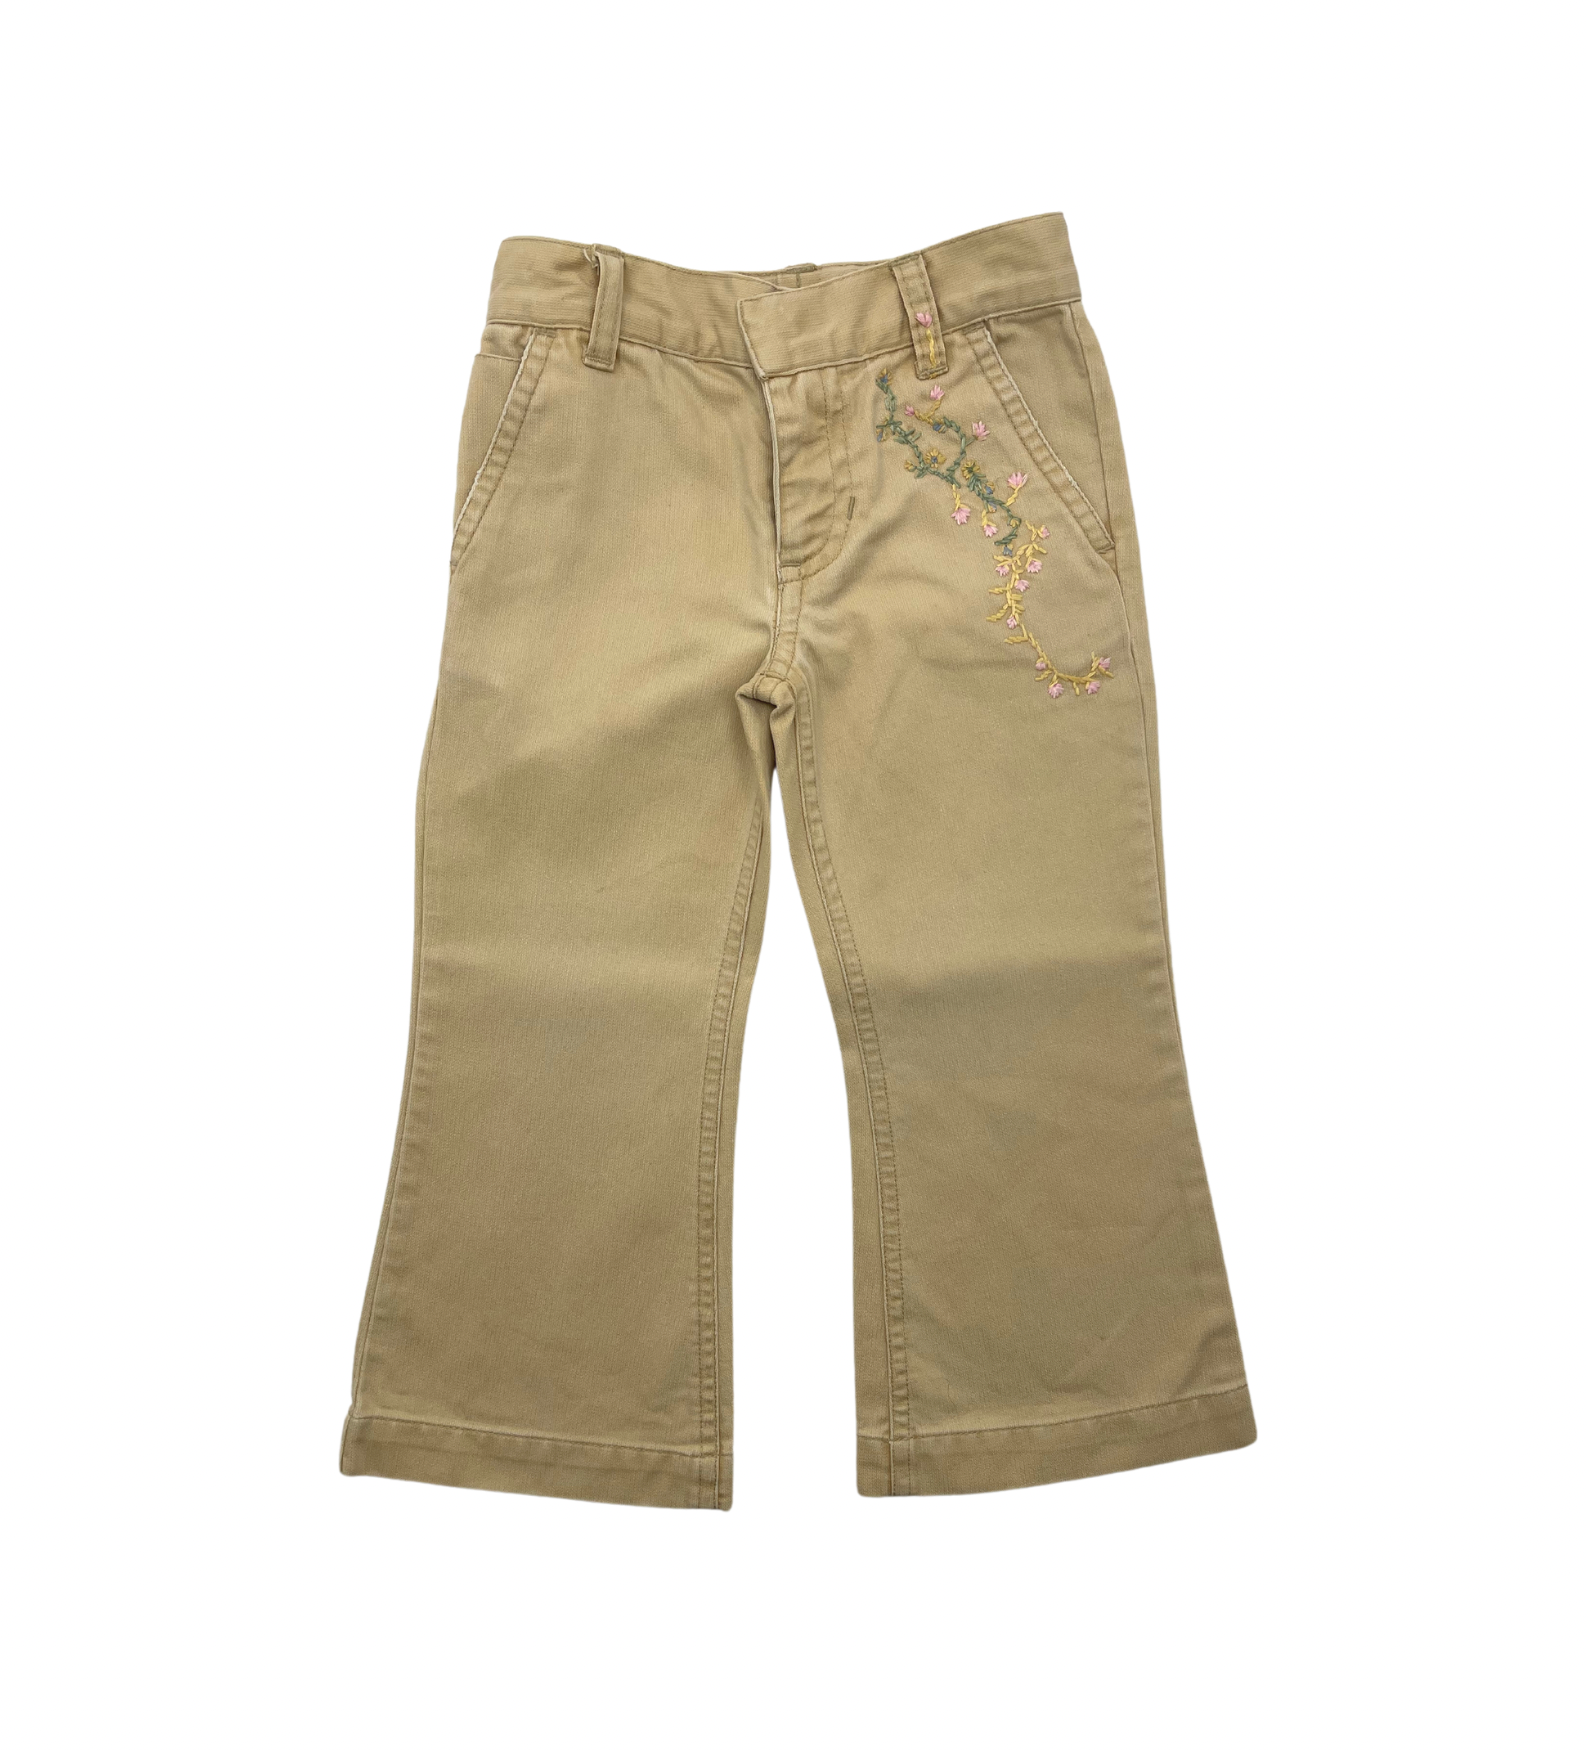 RALPH LAUREN - Beige pants with flower embroidery - 2 years old